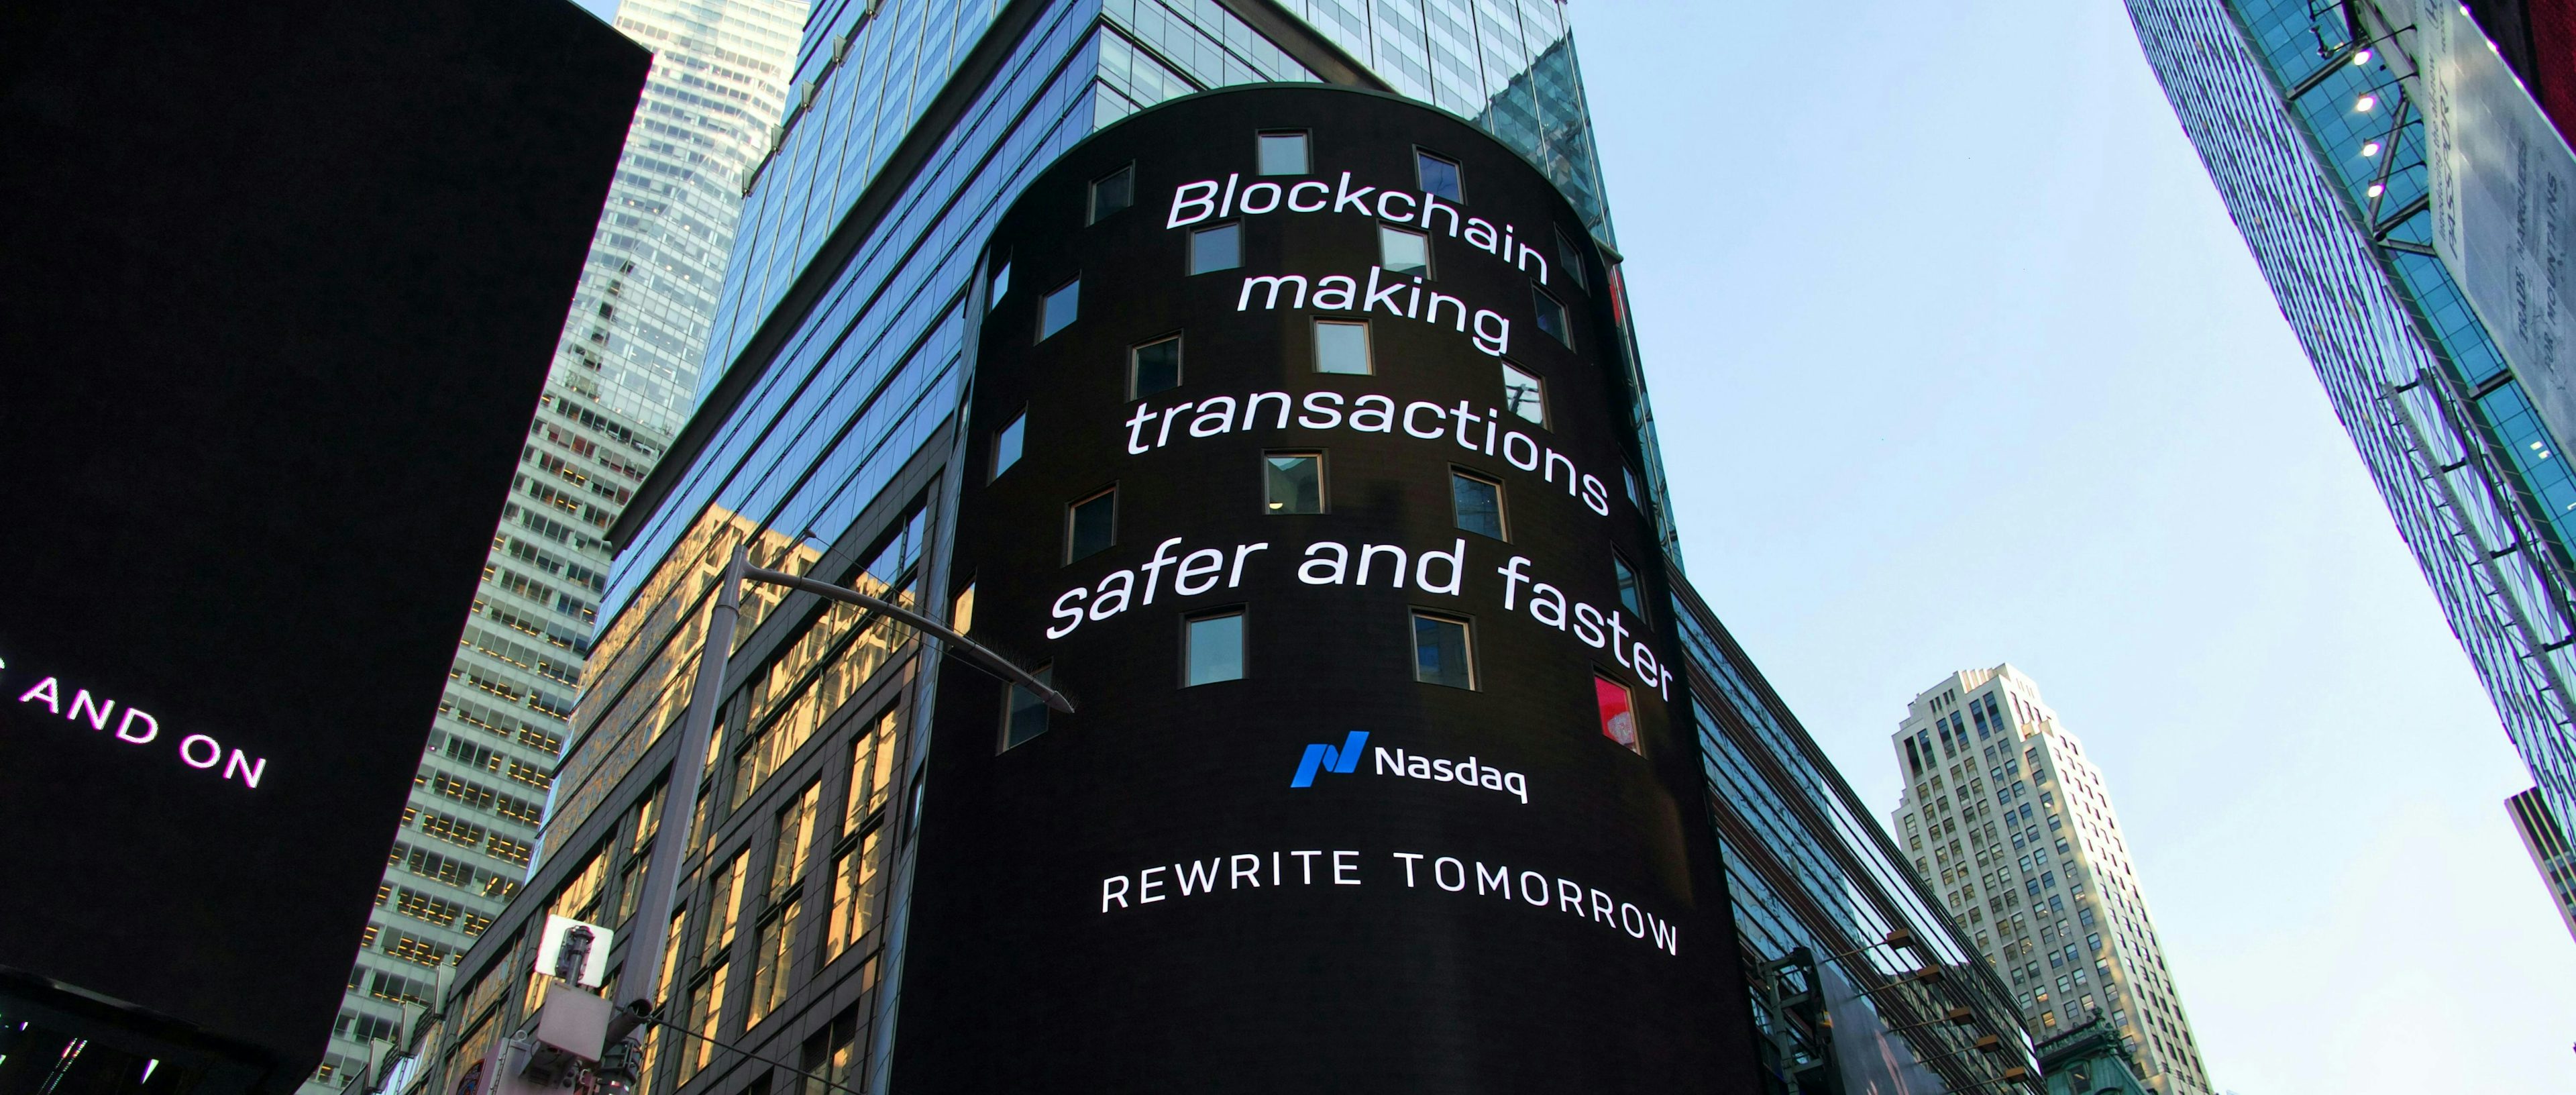 An image showcasing a digital advertisement by Nasdaq displayed on the facade of a tall building. The ad prominently features the text "blockchain making transactions safer and faster," highlighting the benefits of blockchain technology in financial transactions.